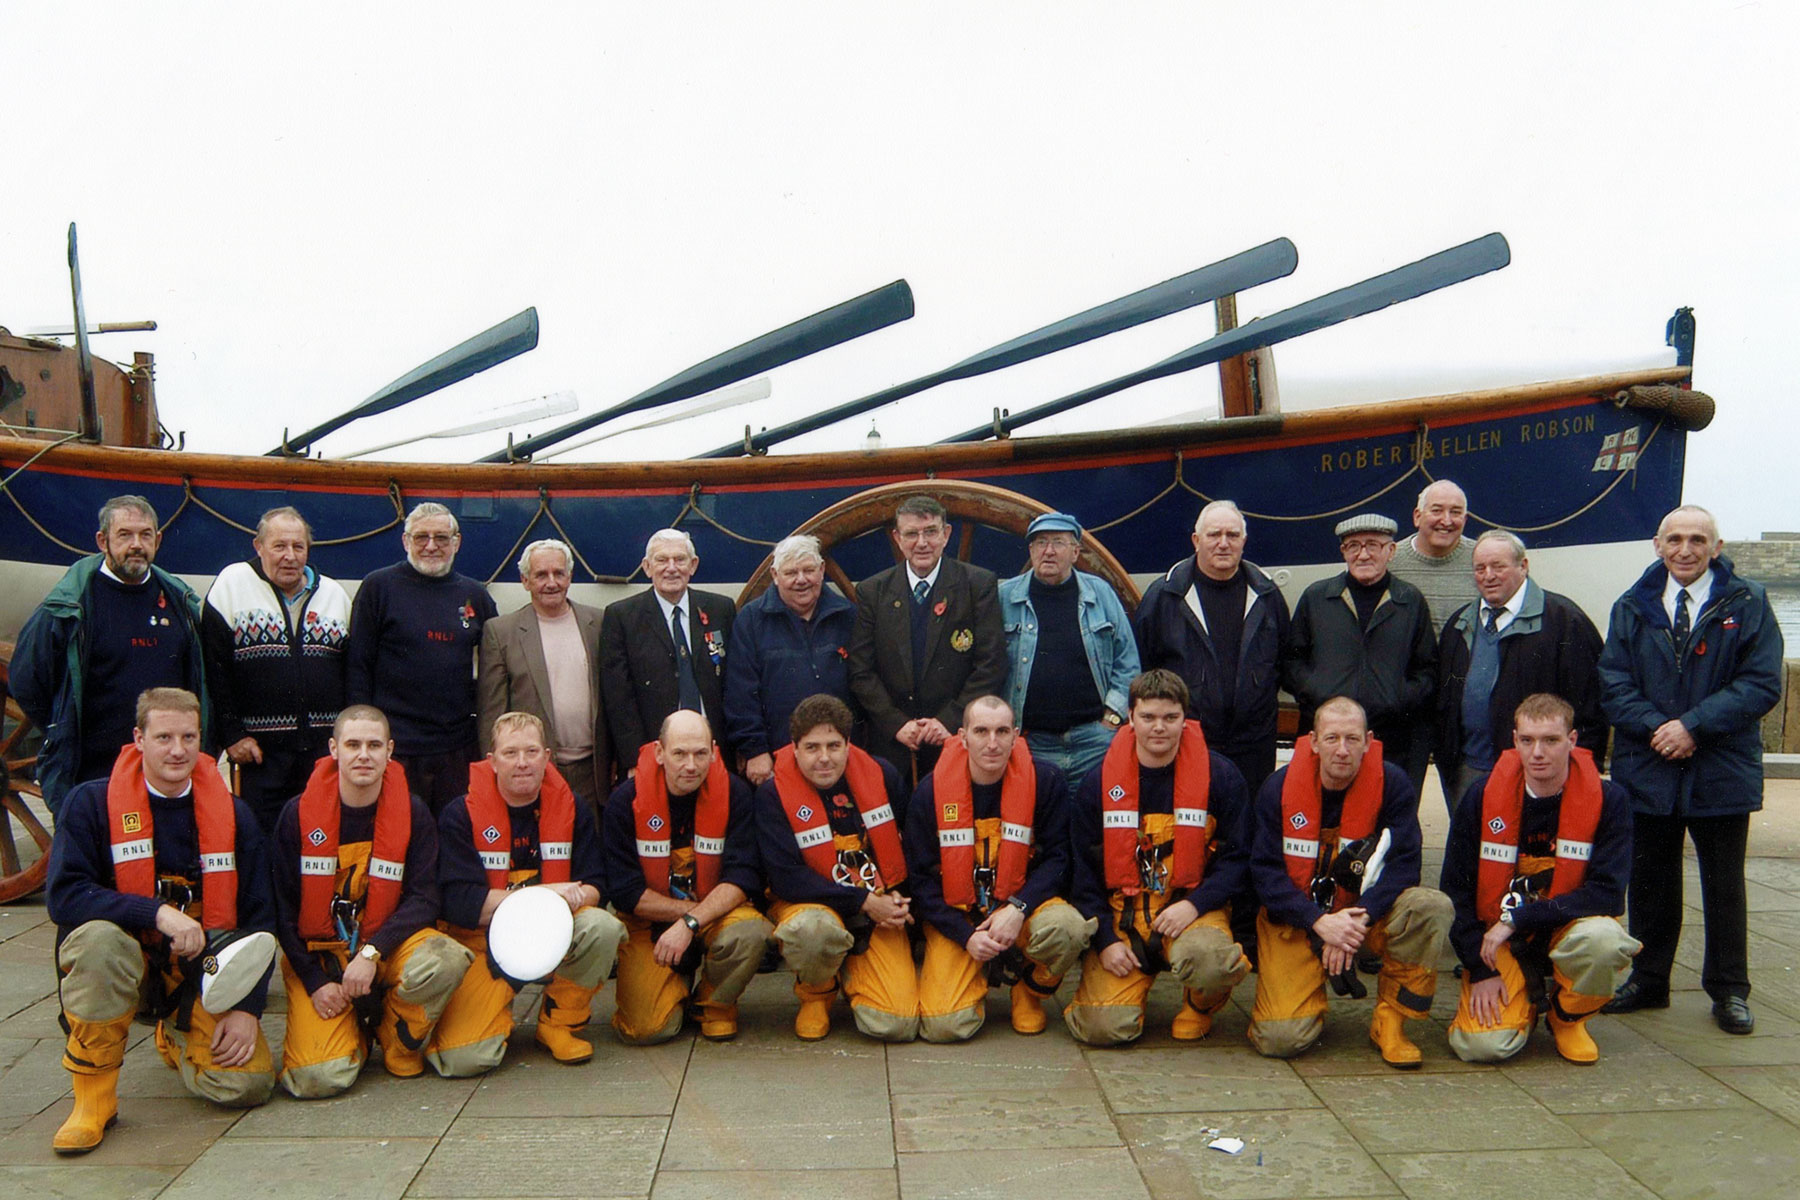 Lifeboat Crew Old and New